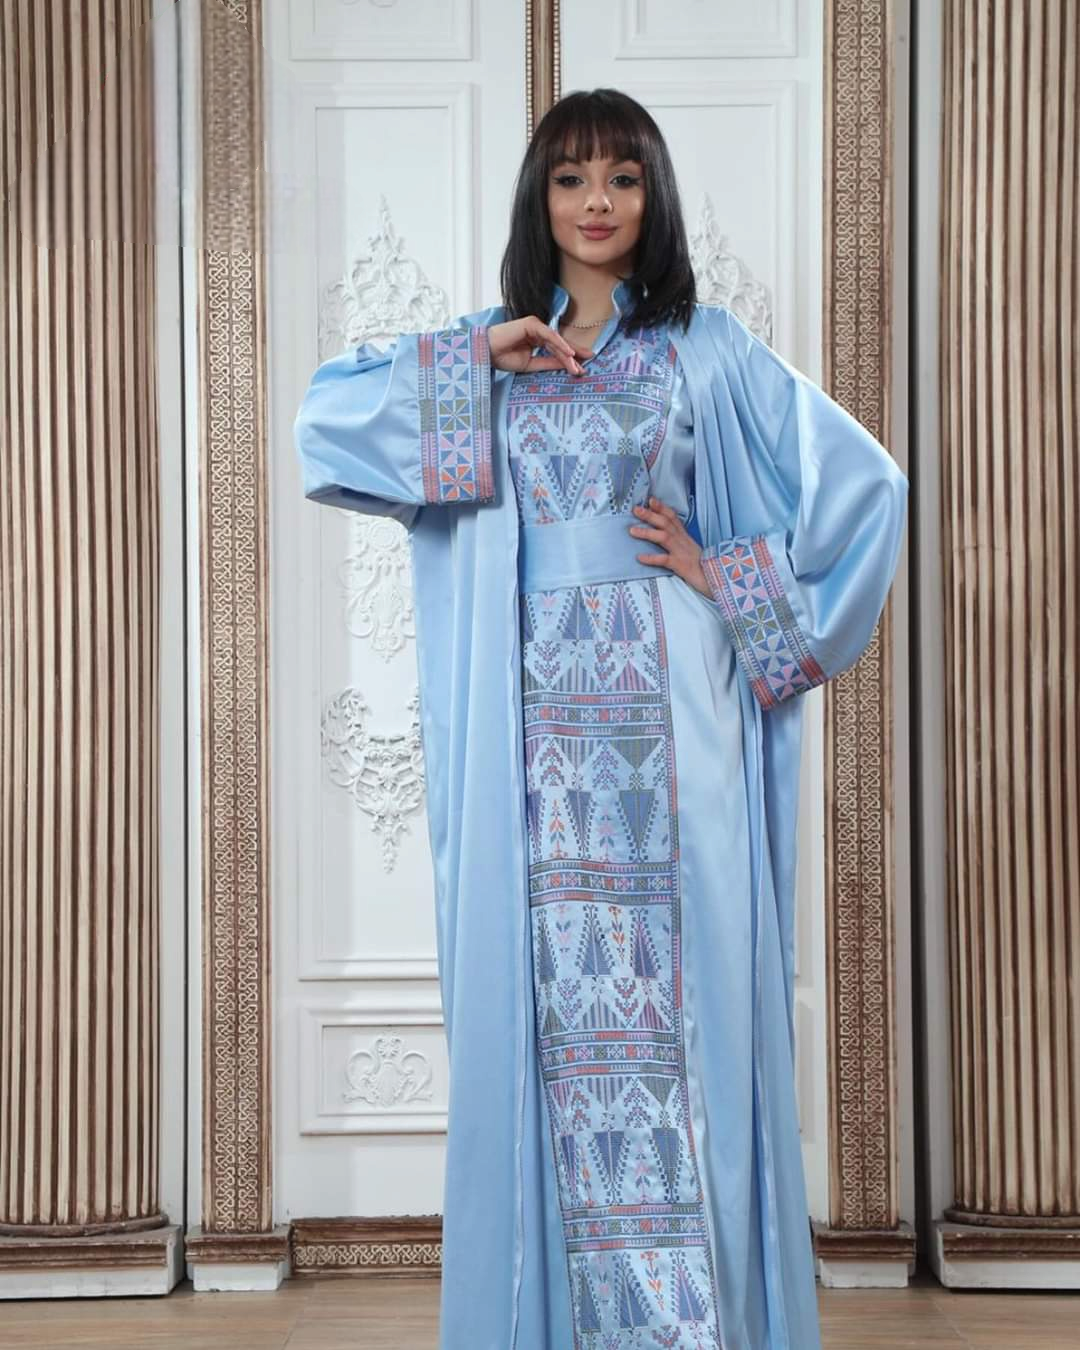 Sky Princess - 2 Piece High Quality Traditional Embroidered Satin Palestinian Style /Thobe/Dress